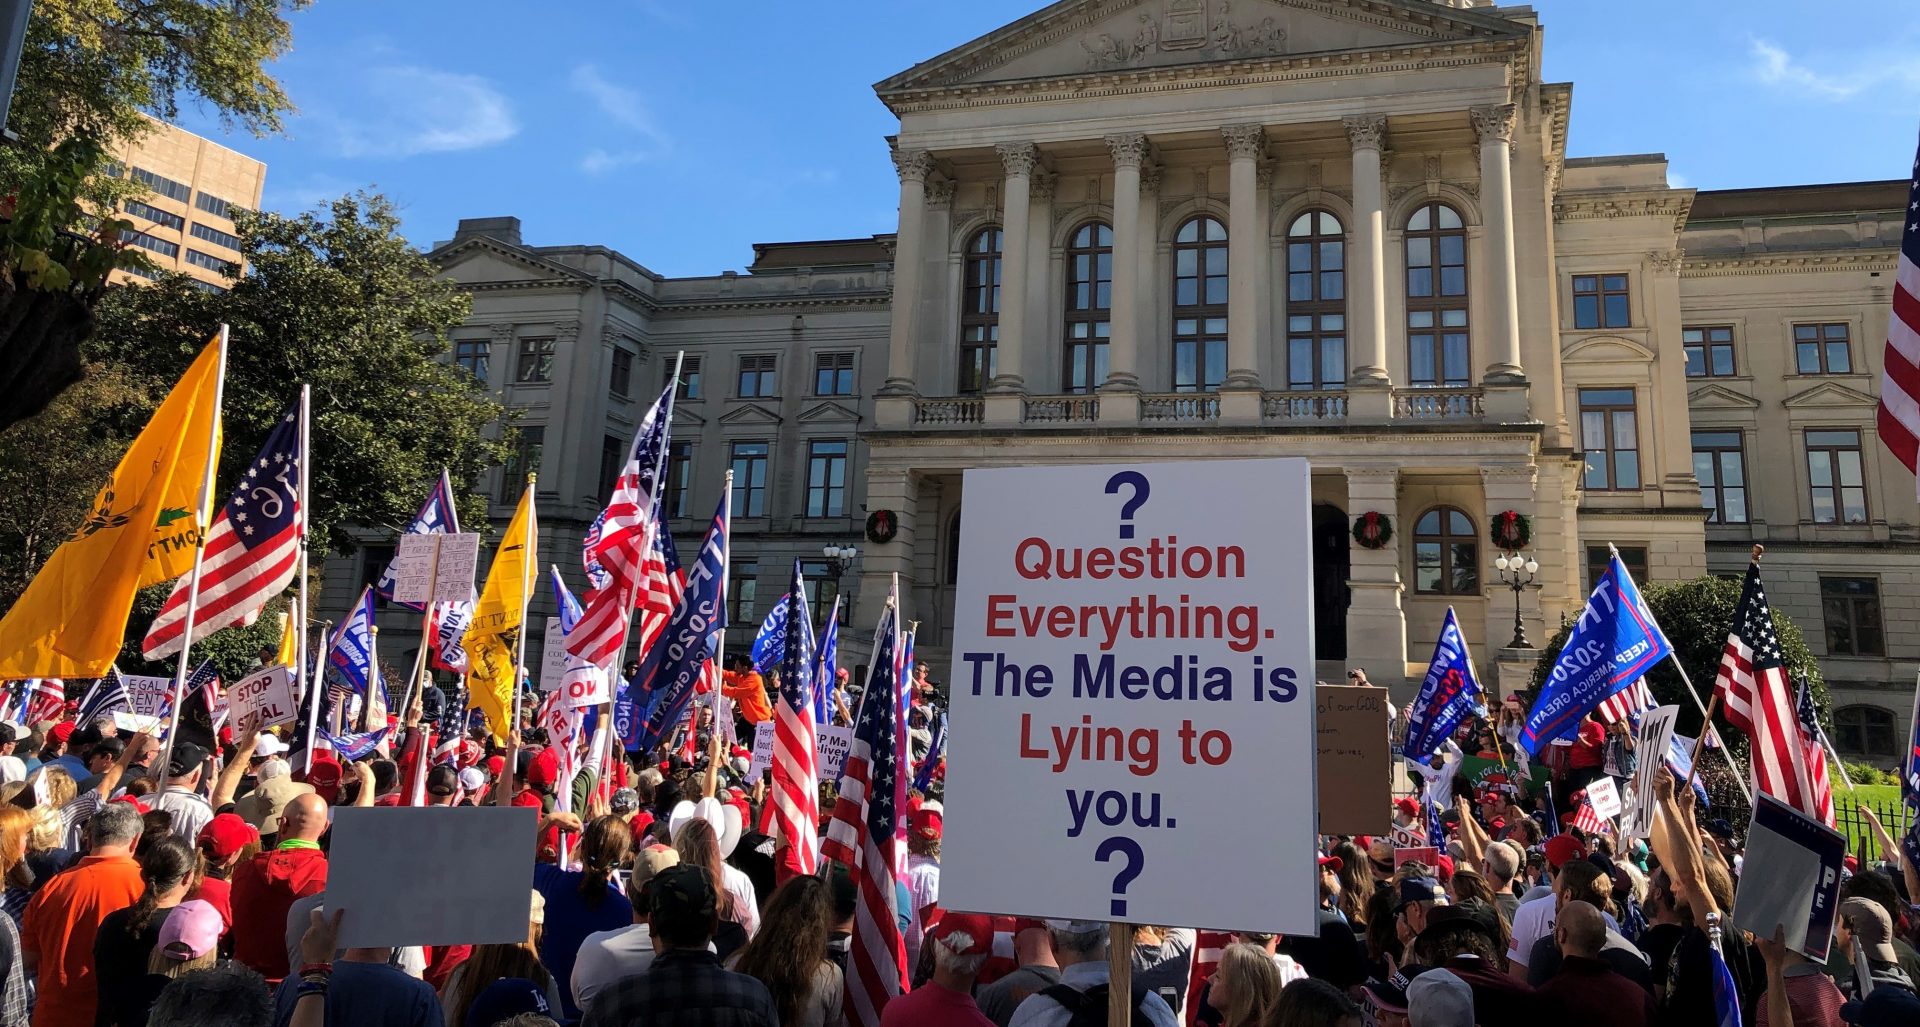 A rally organized by pro-Trump supporters to challenge Georgia's election results, outside of the state capitol in Atlanta on Nov. 21, 2020.